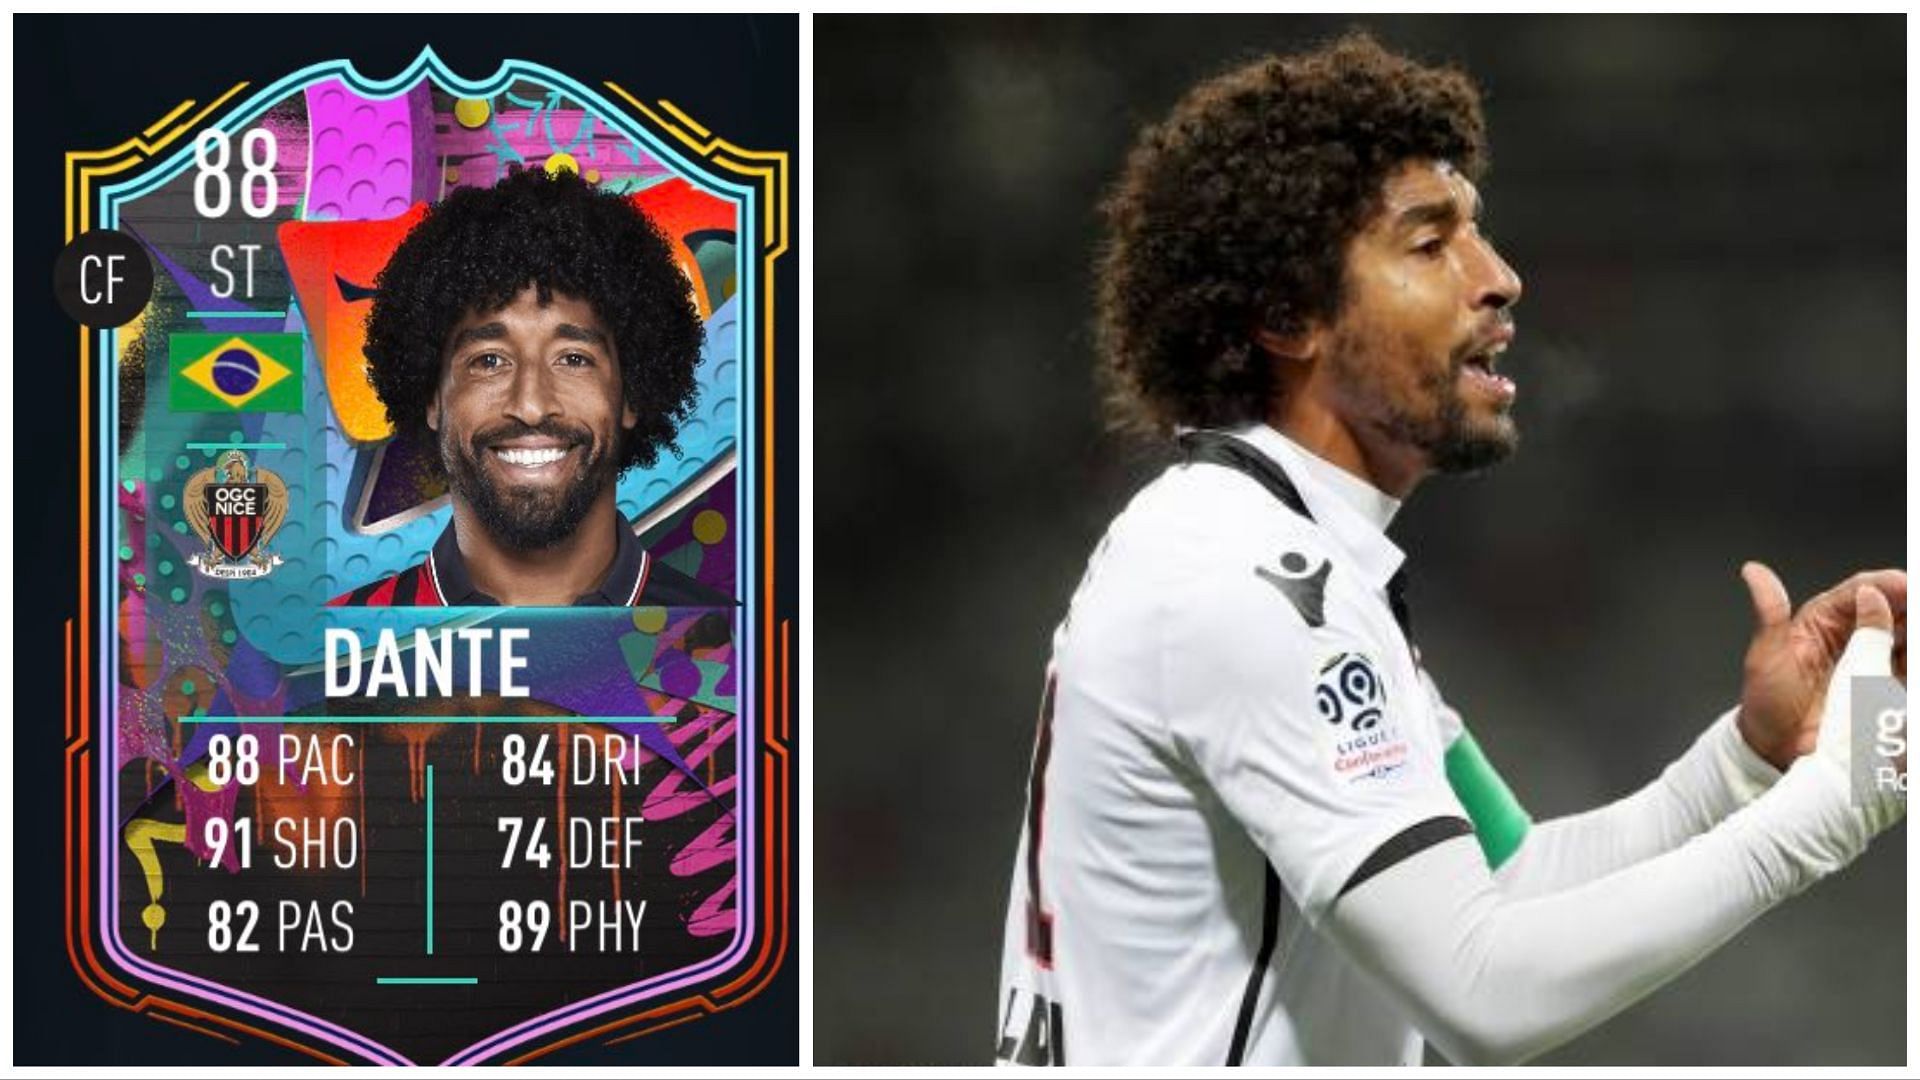 OOP Dante SBC is live in FIFA 23 (Images via EA Sports and Getty Images)